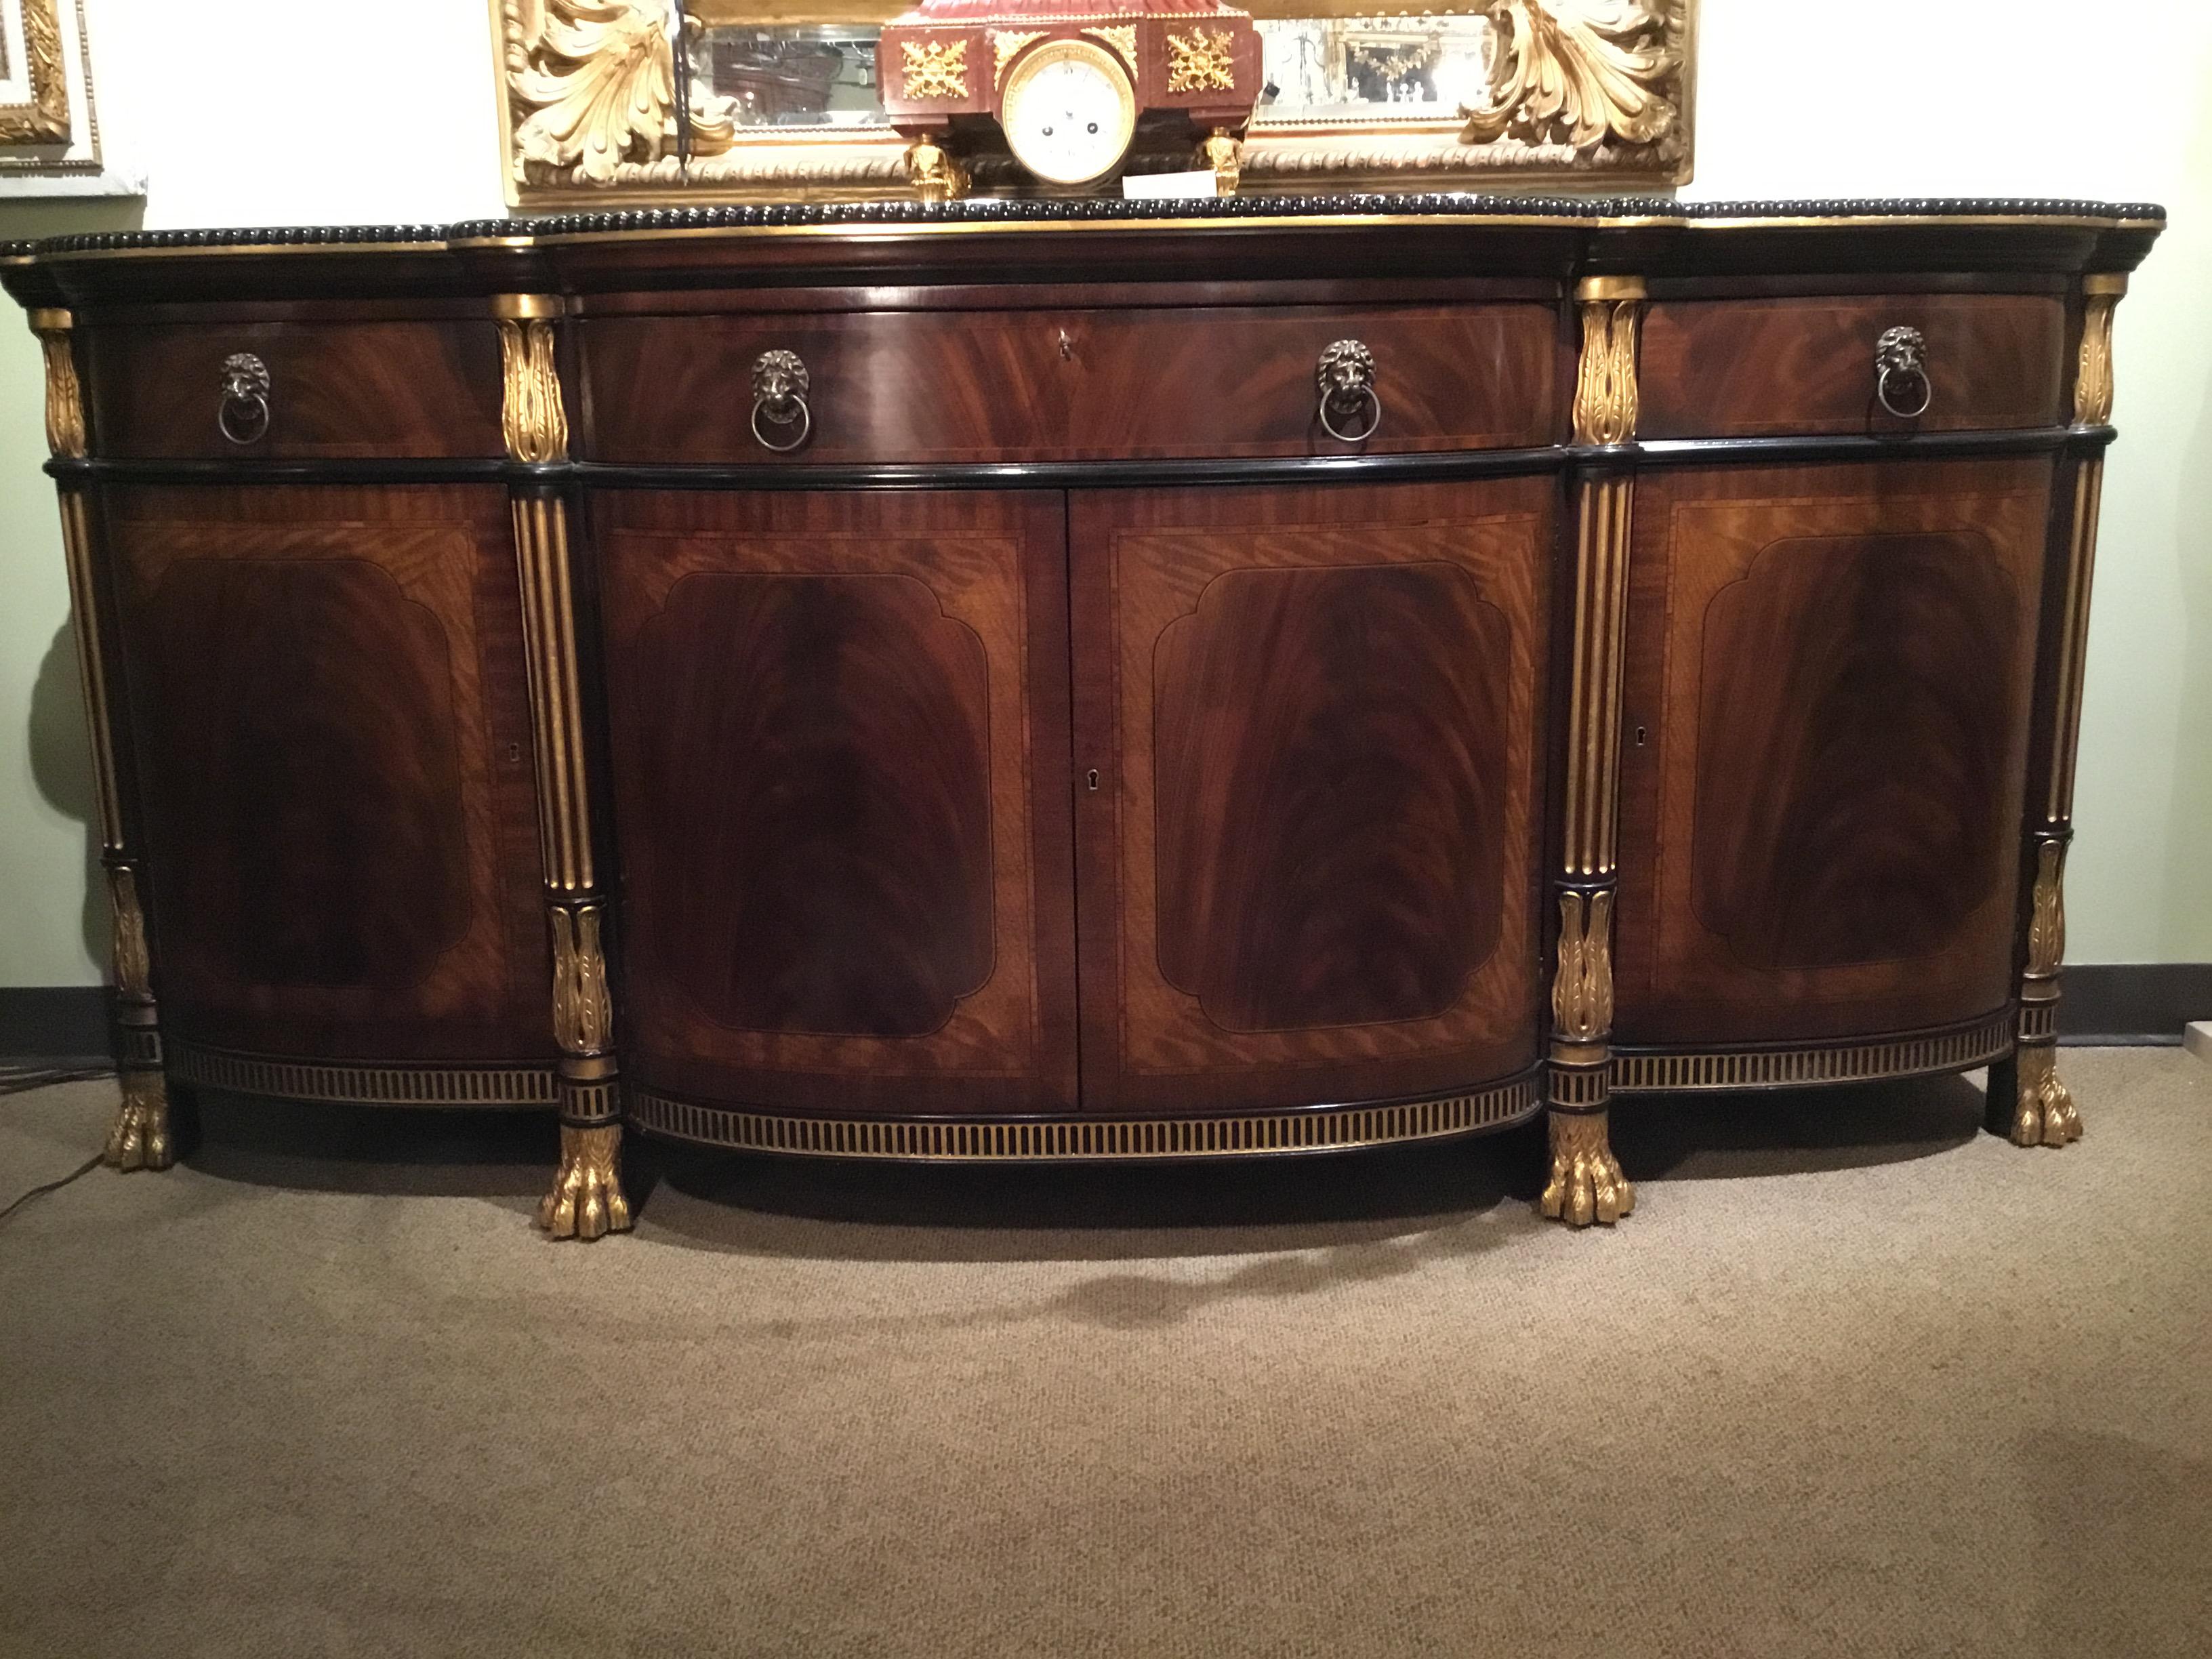 French Regency style reproduction of an 18th century. Style. Mahogany with giltwood accents.
Fine crotch mahogany with superb carving and excellent detail throughout. The piece is
beautifully curved in a serpentine fashion in the front. A